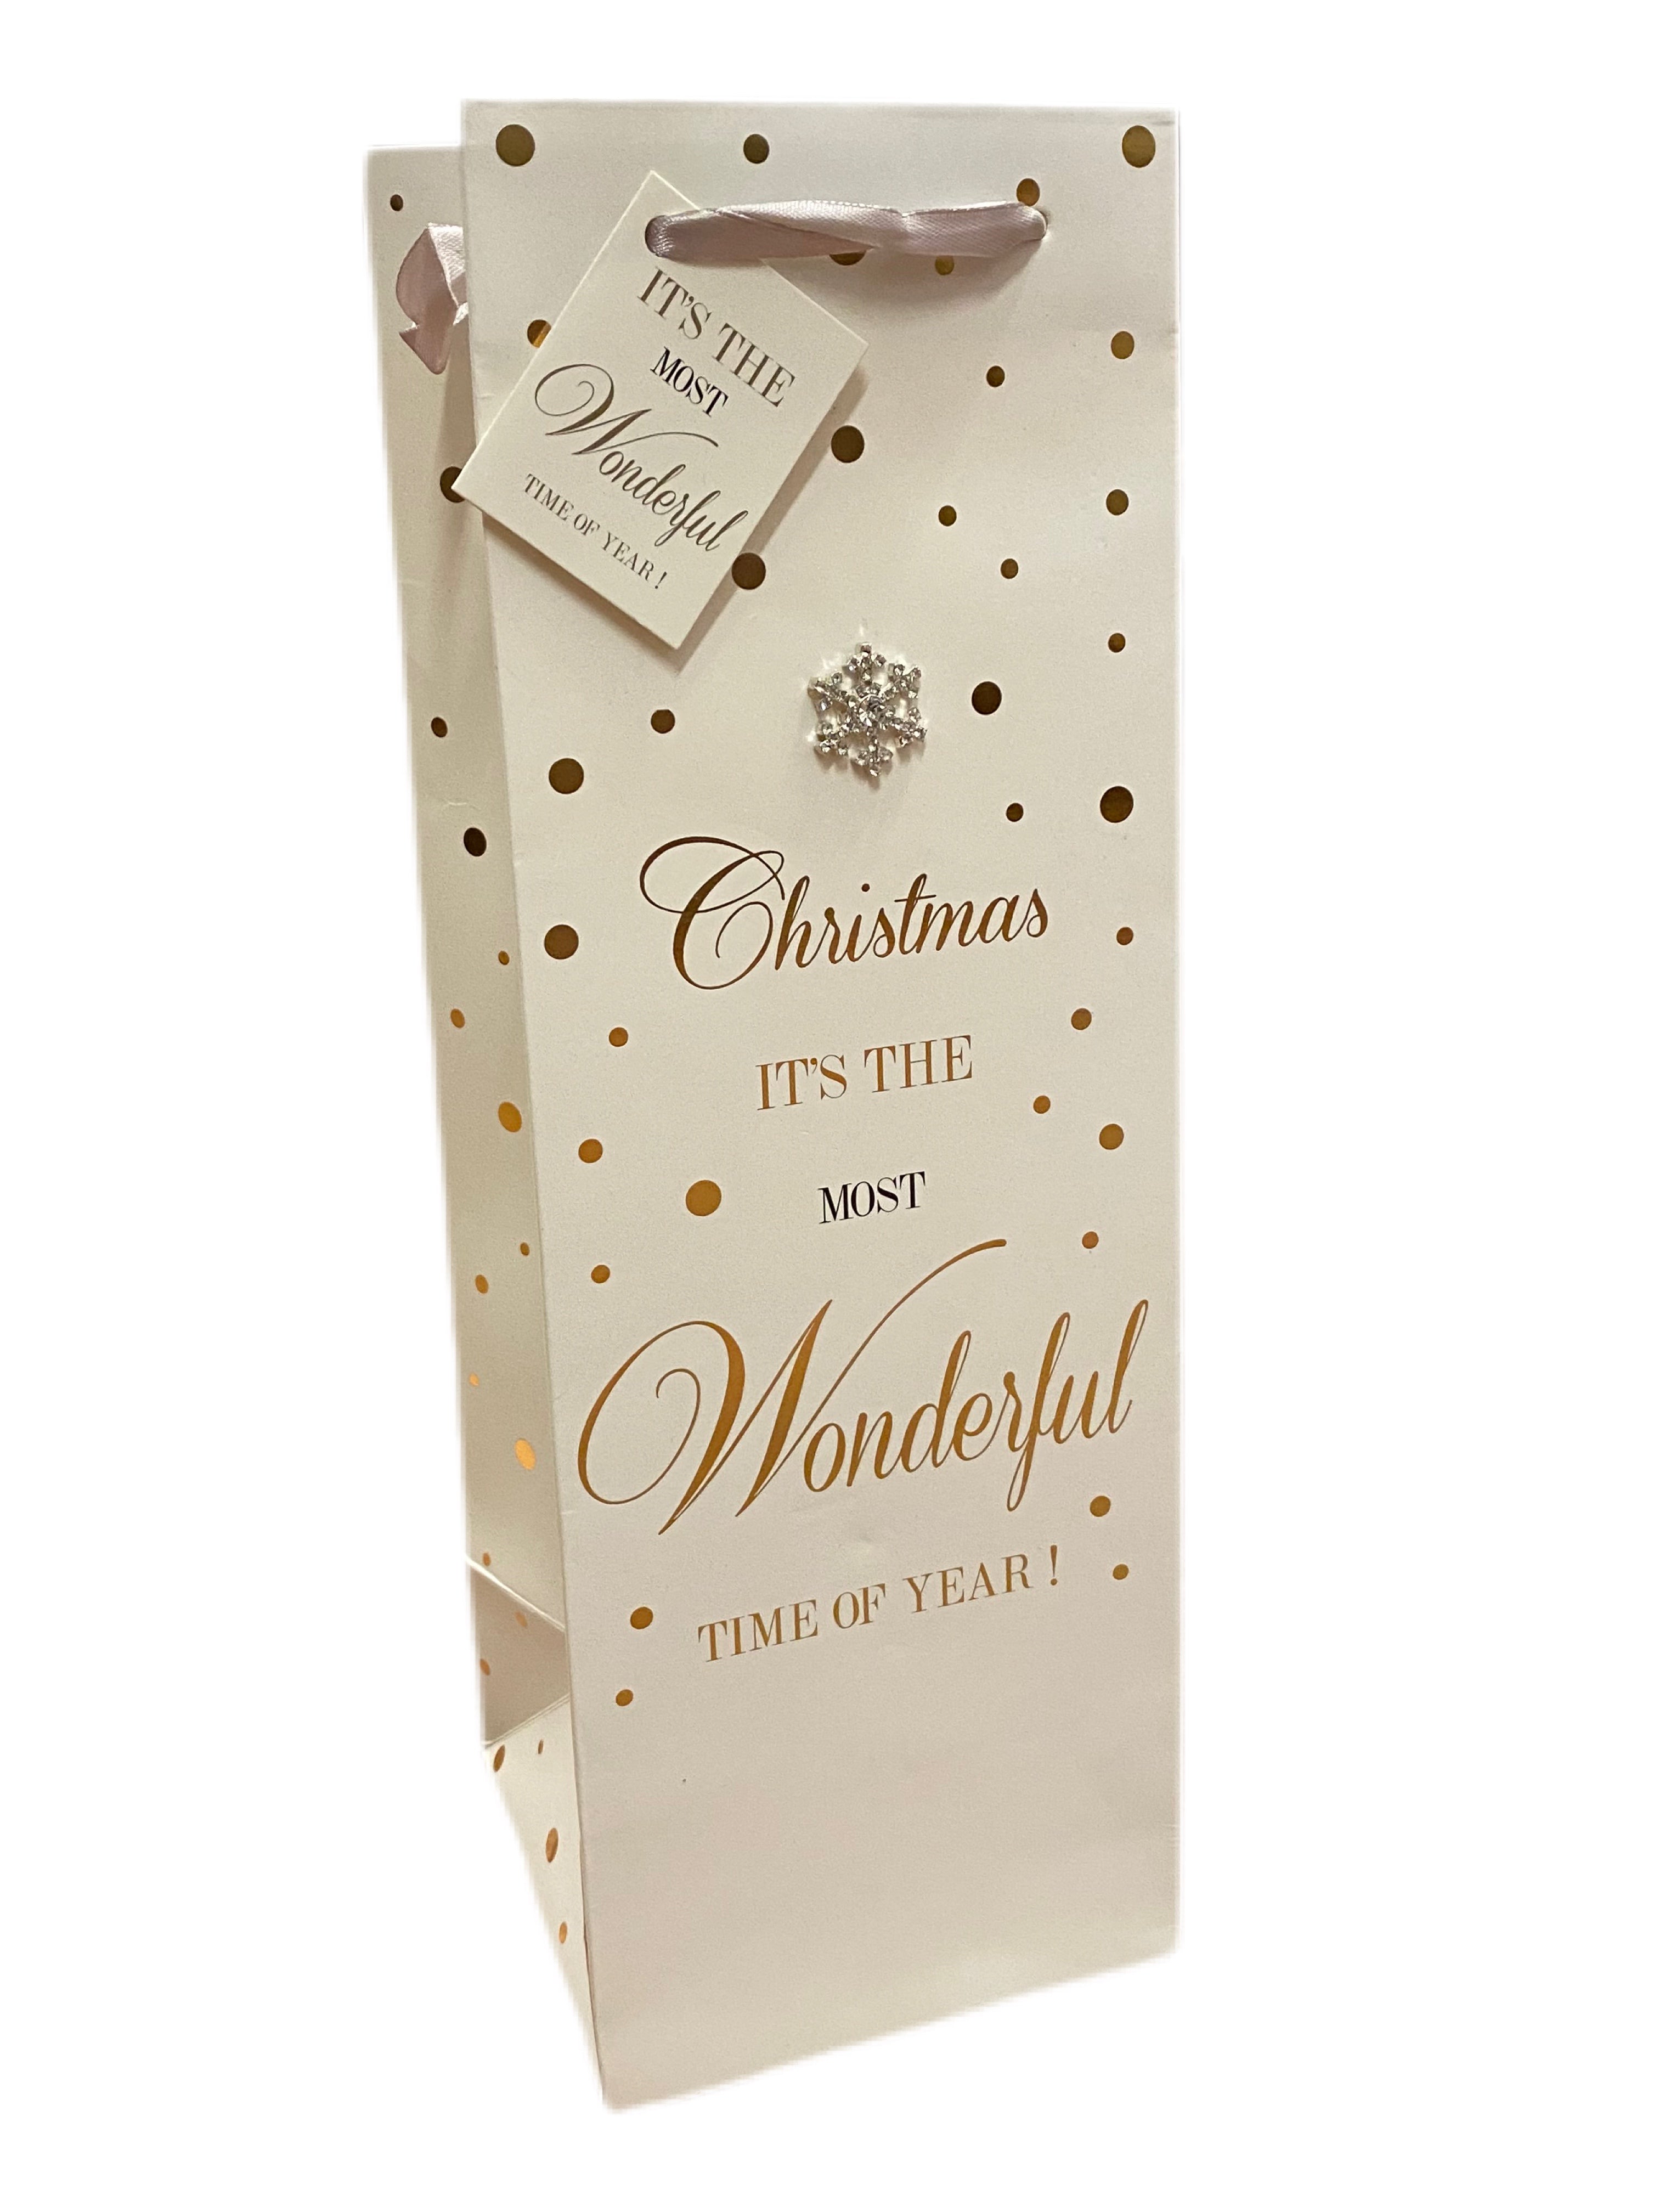 Christmas is the most Wonderful time of the Year Bottle Bag Christmas Gift Bag - Kate's Cupboard